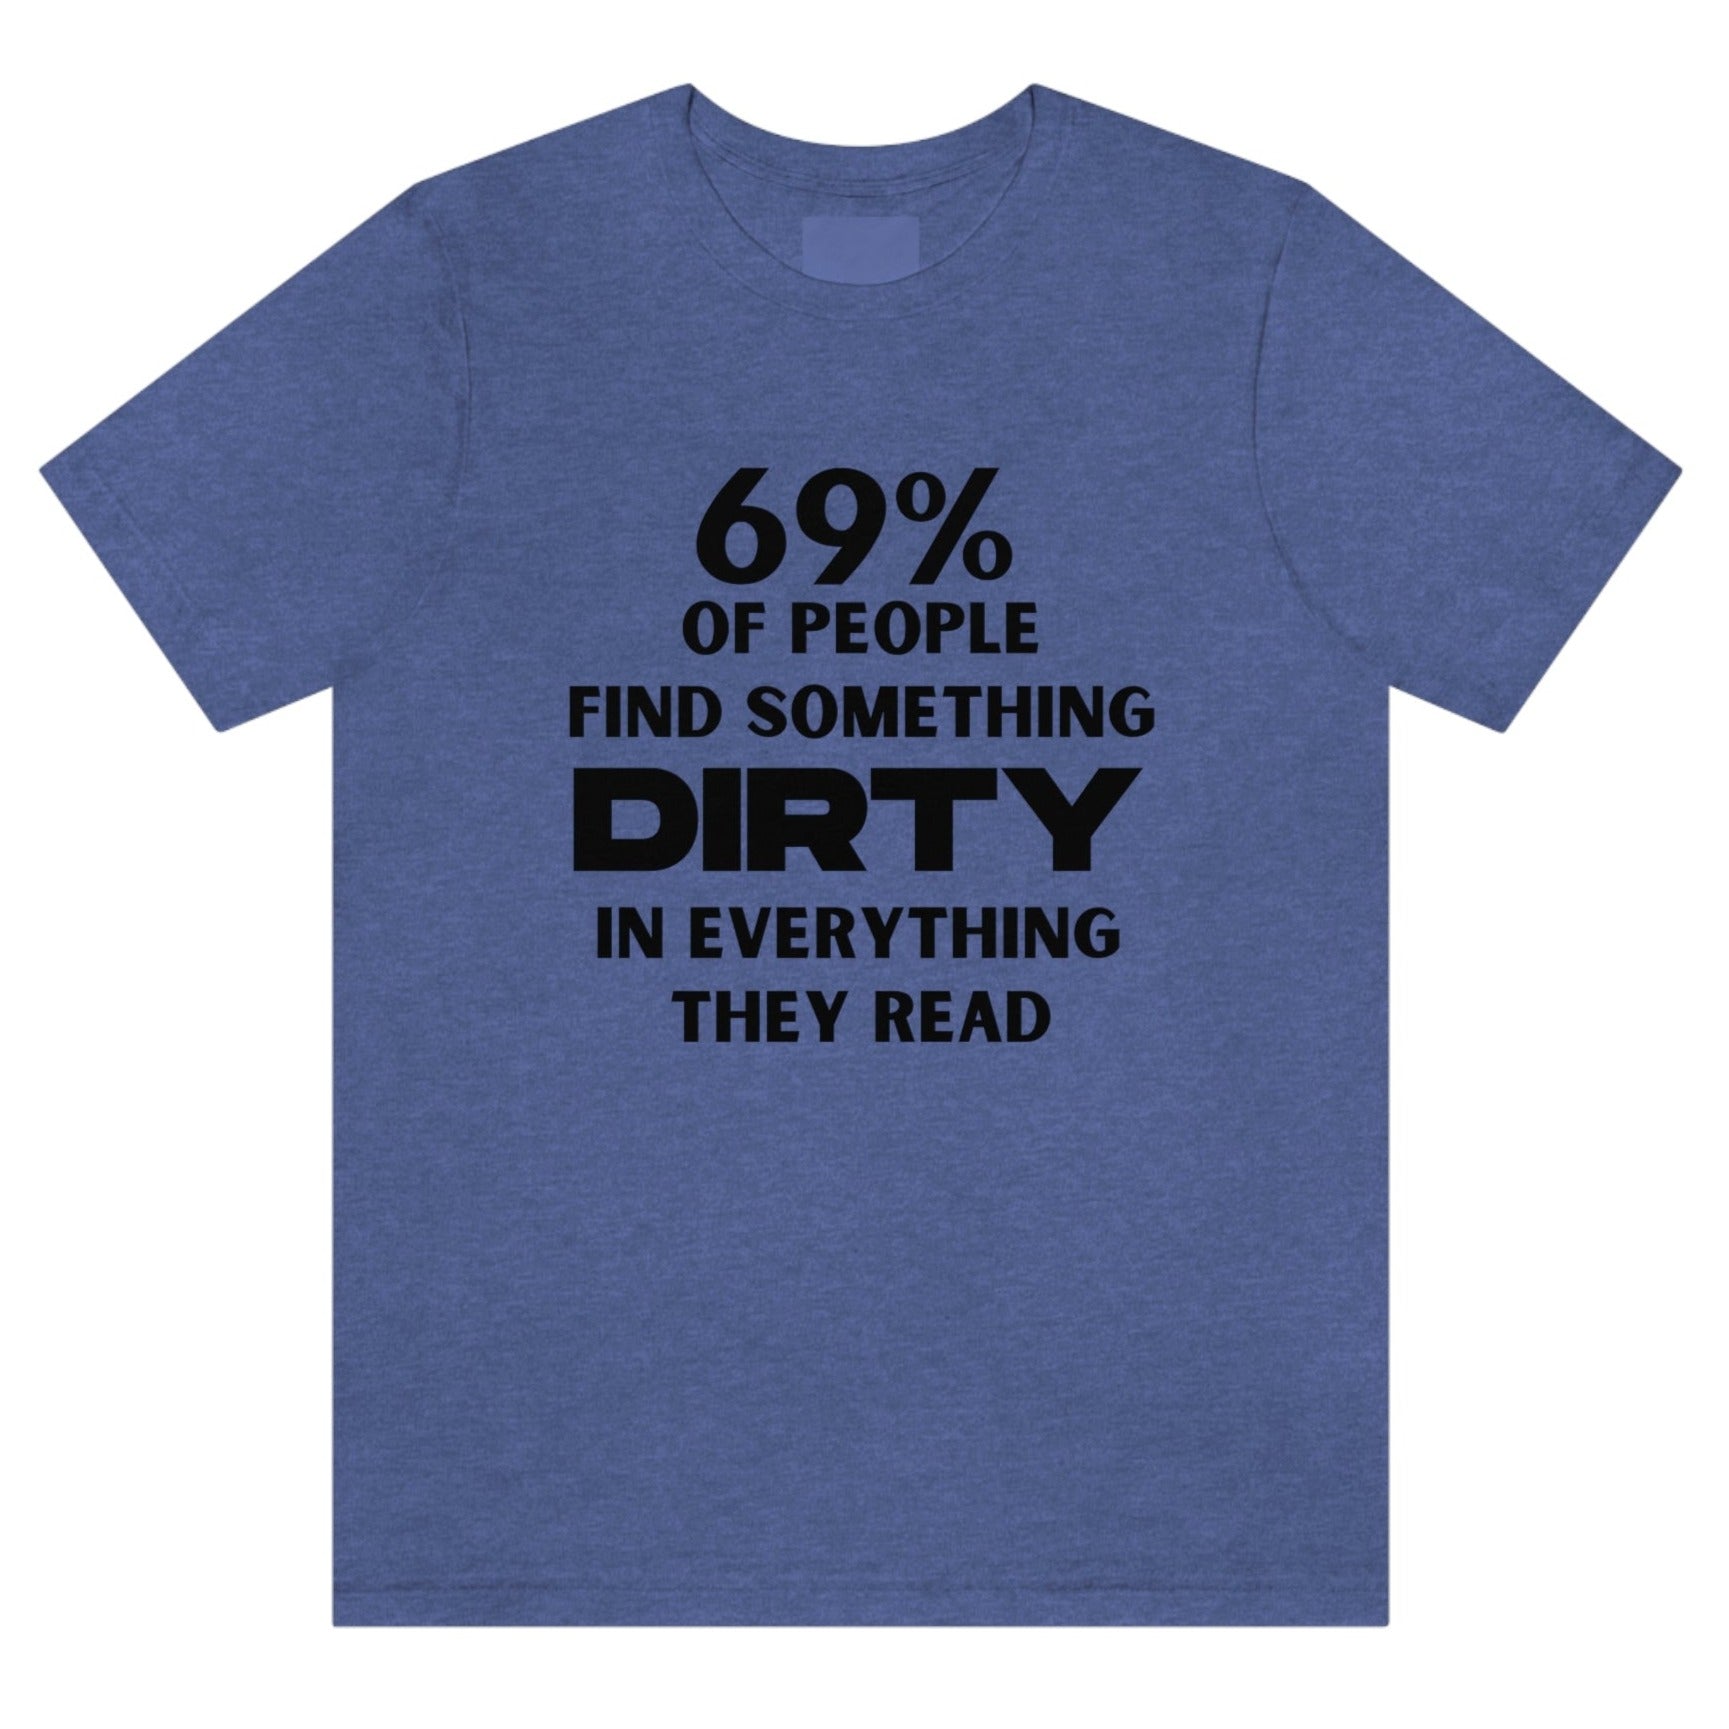 69-percent-of-people-find-something-dirty-in-everything-they-read-heather-true-royal-t-shirt-unisex-funny